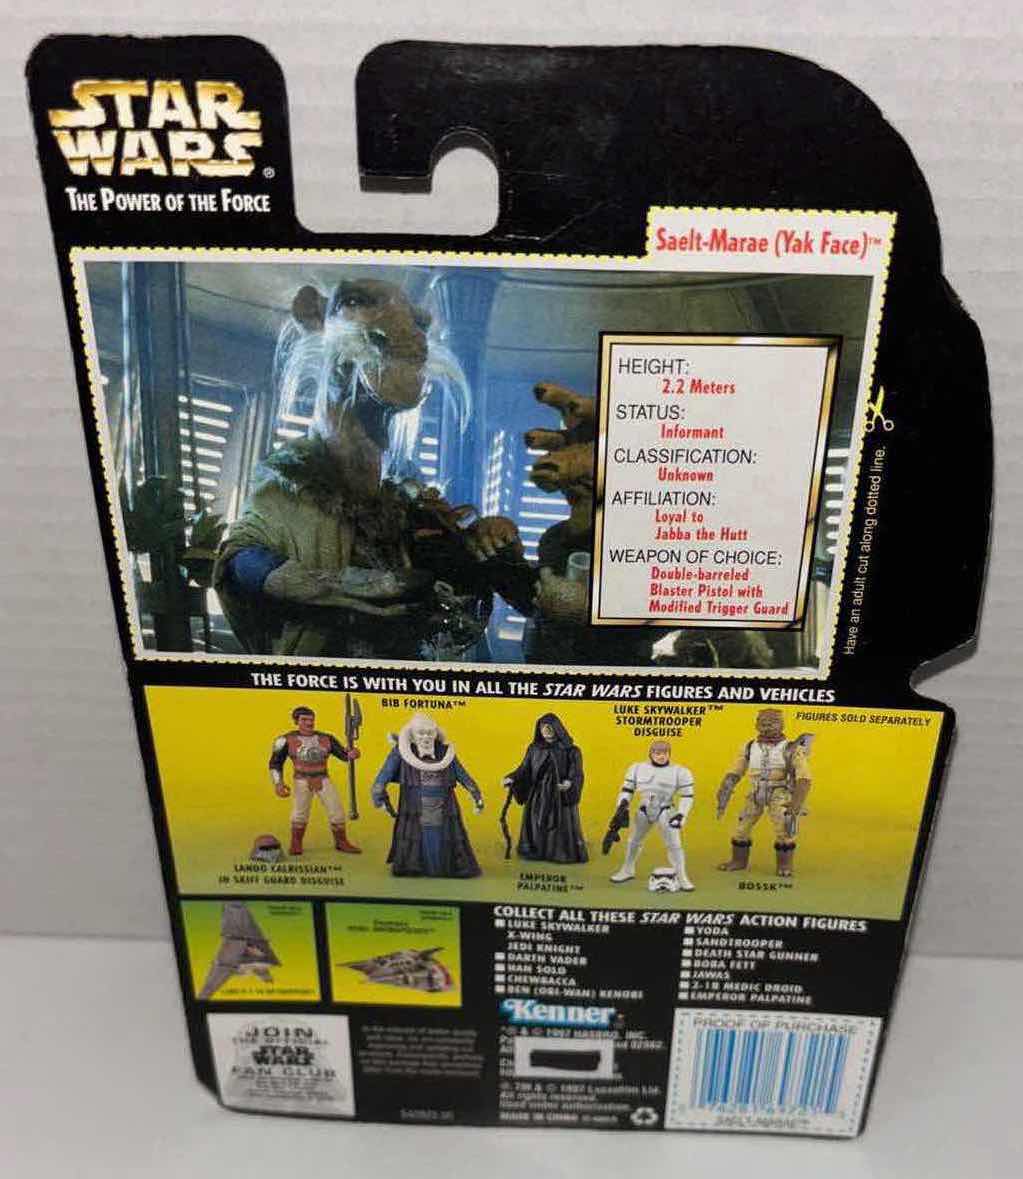 Photo 3 of NEW KENNER STAR WARS POWER OF THE FORCE ACTION FIGURE, SAELT-MARAE (YAK FACE) W BATTLE STAFF